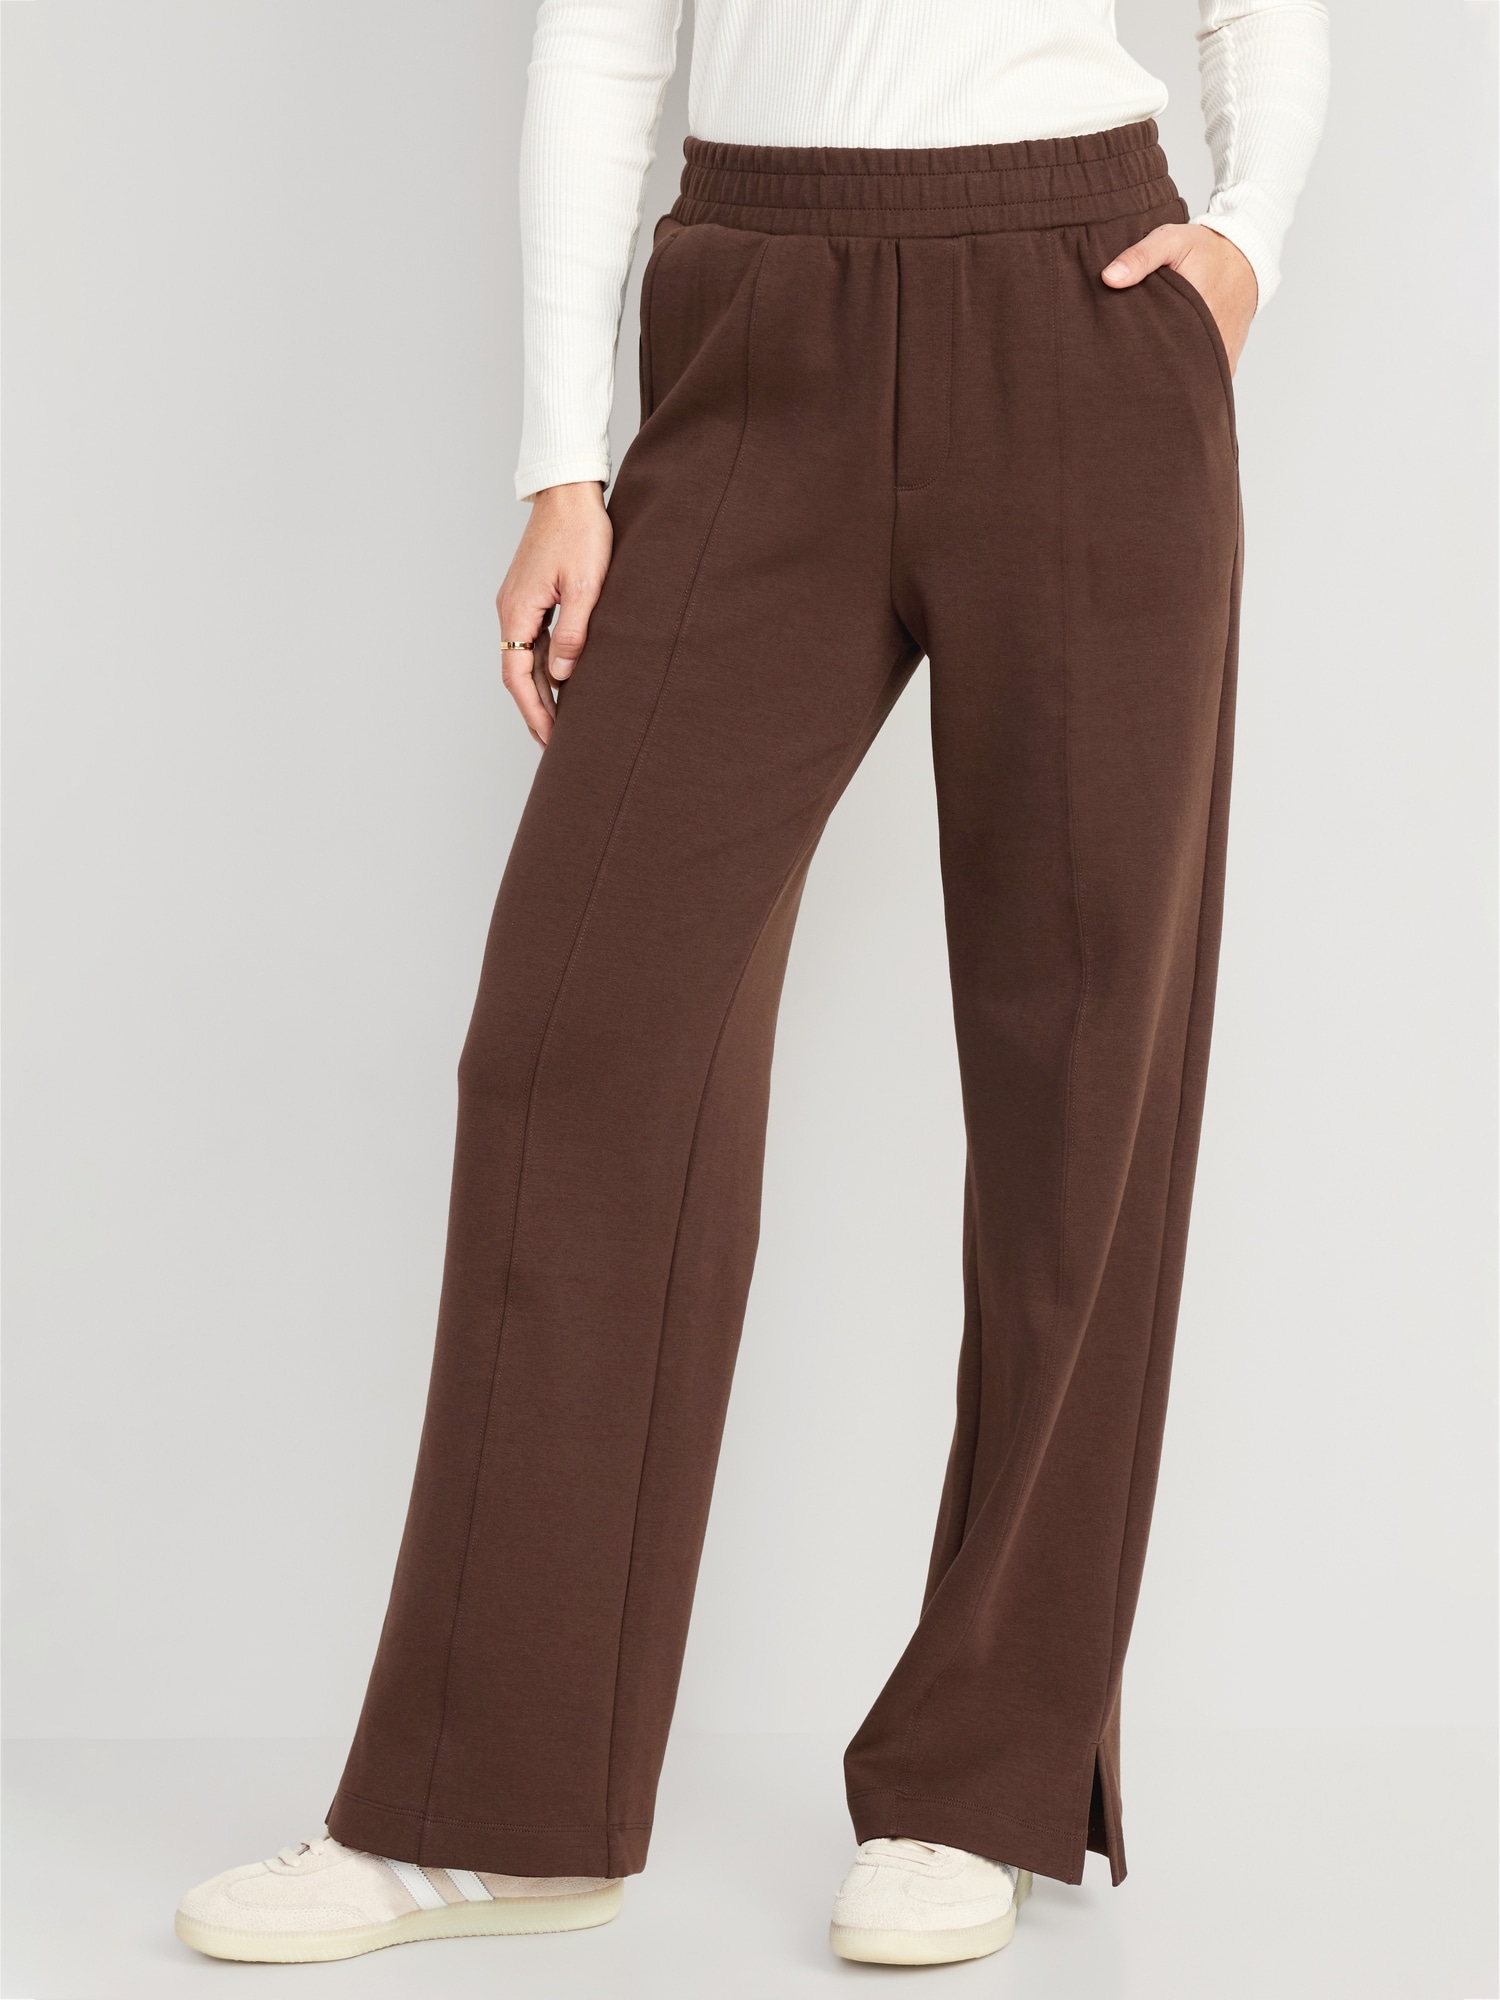 Trouser Pants for women, Women's Fashion, Bottoms, Other Bottoms on  Carousell-saigonsouth.com.vn